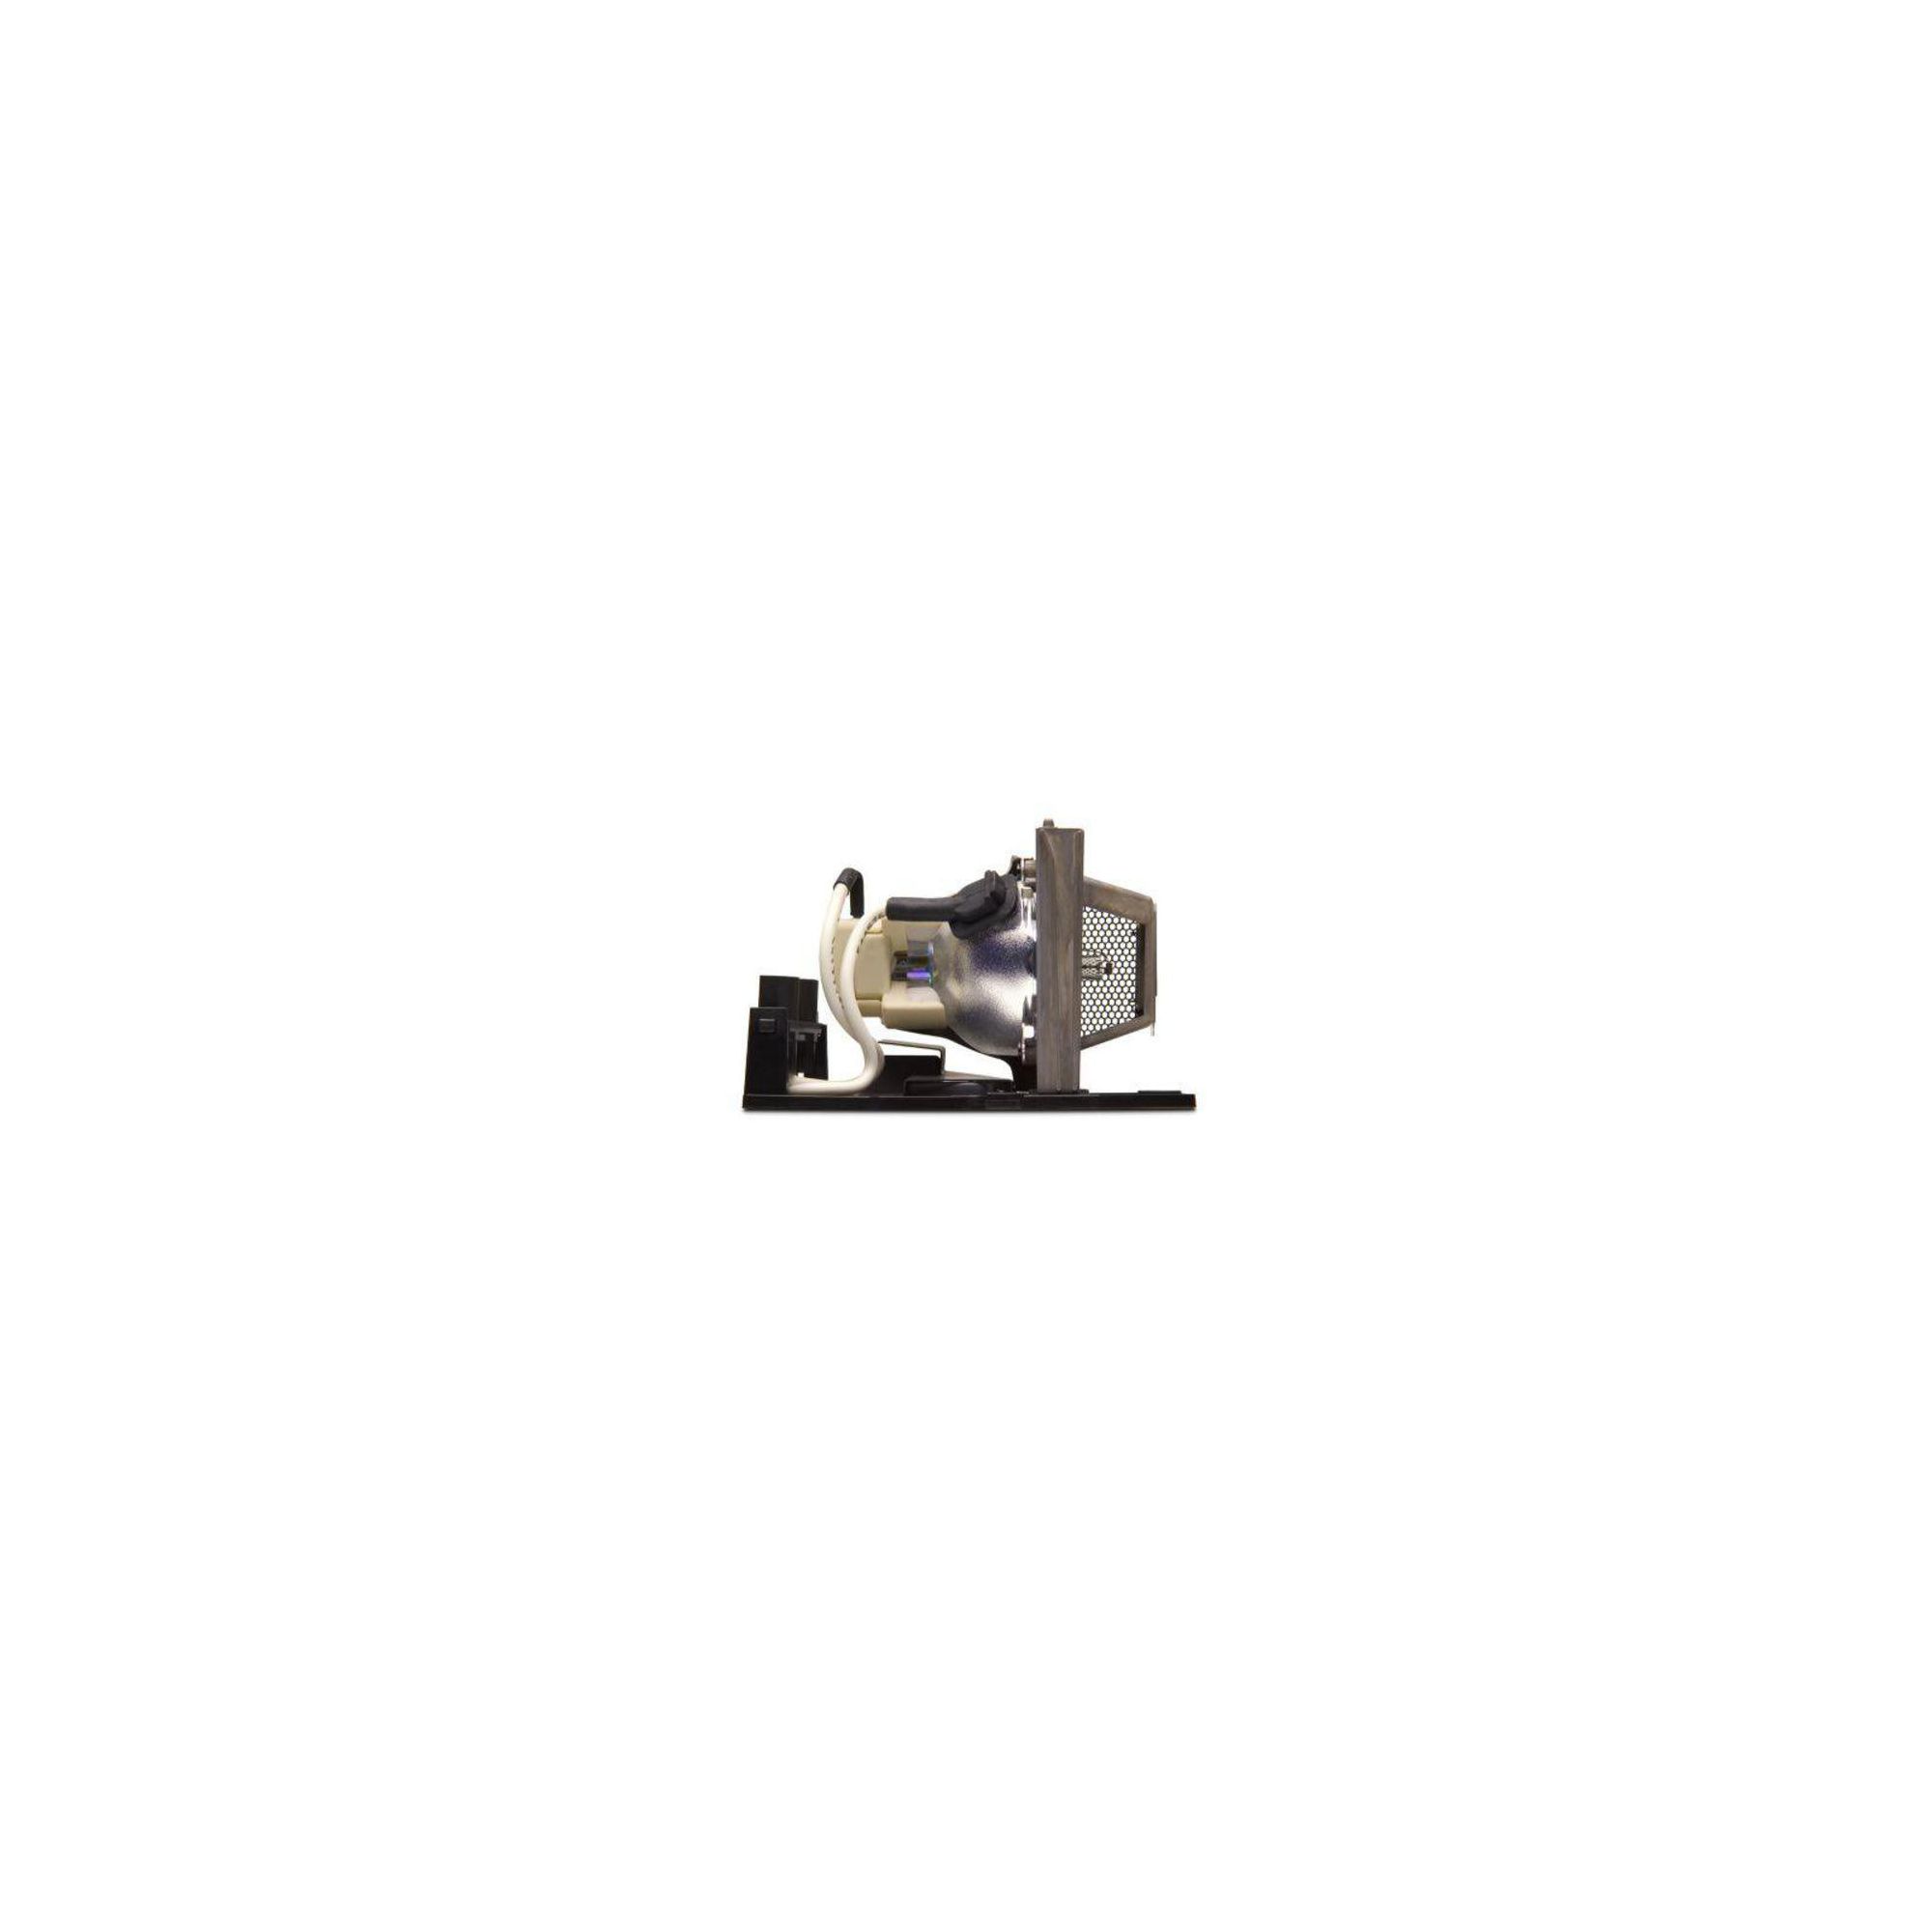 HP MP3222 Projector Lamp Module at Tescos Direct